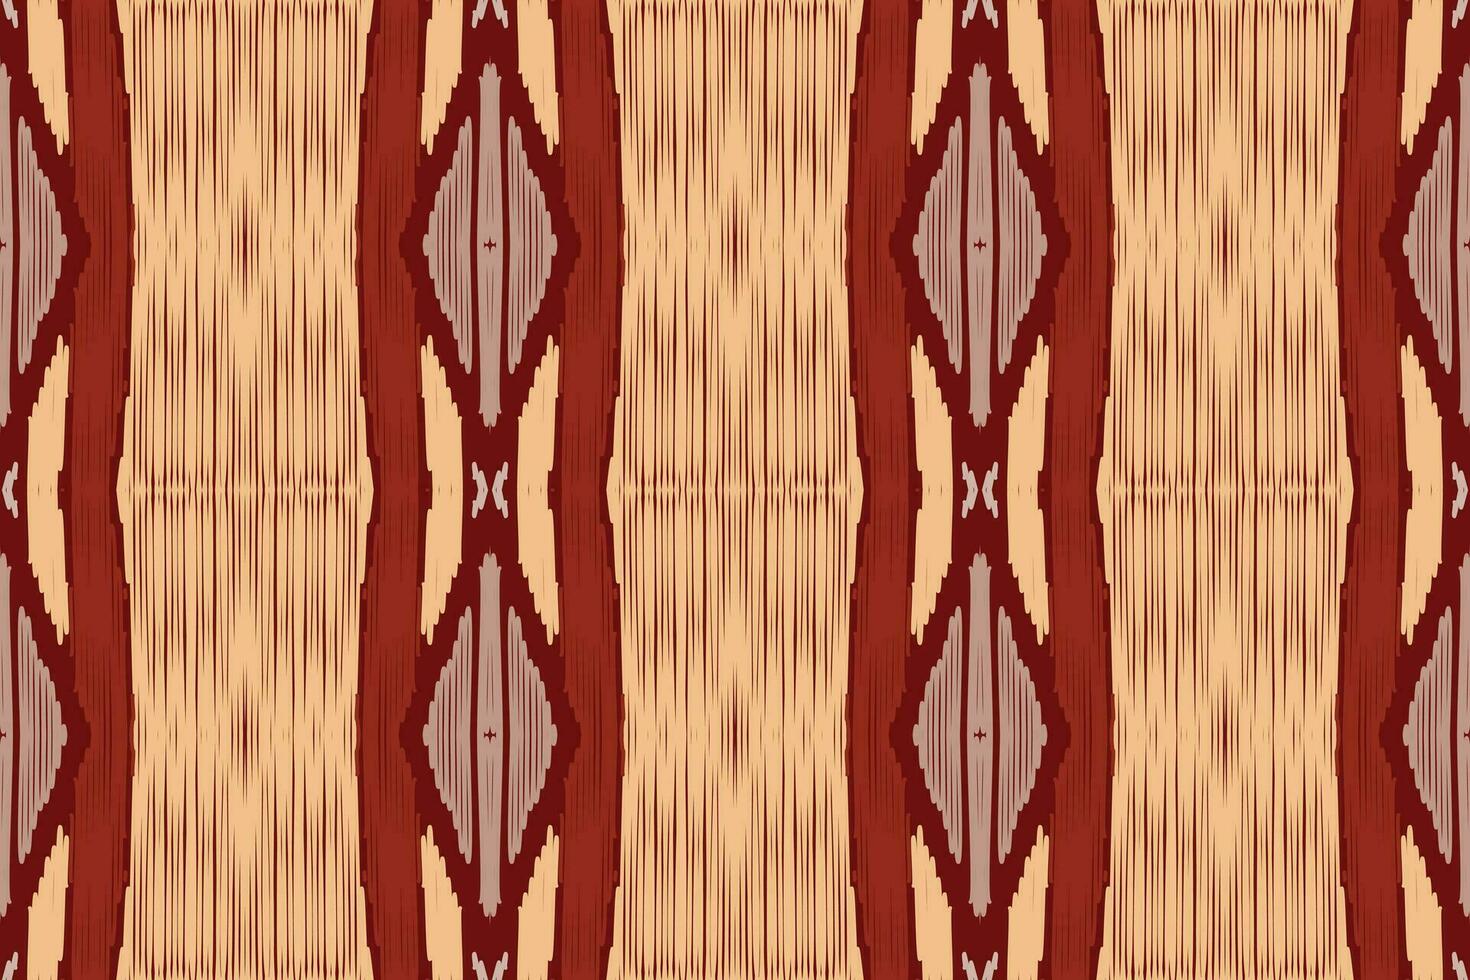 American ethnic native pattern.Traditional Navajo,Aztec,Apache,Southwest and Mexican style fabric pattern.Abstract vector motifs pattern.Design for fabric,clothing,blanket,carpet,woven,wrap,decoration